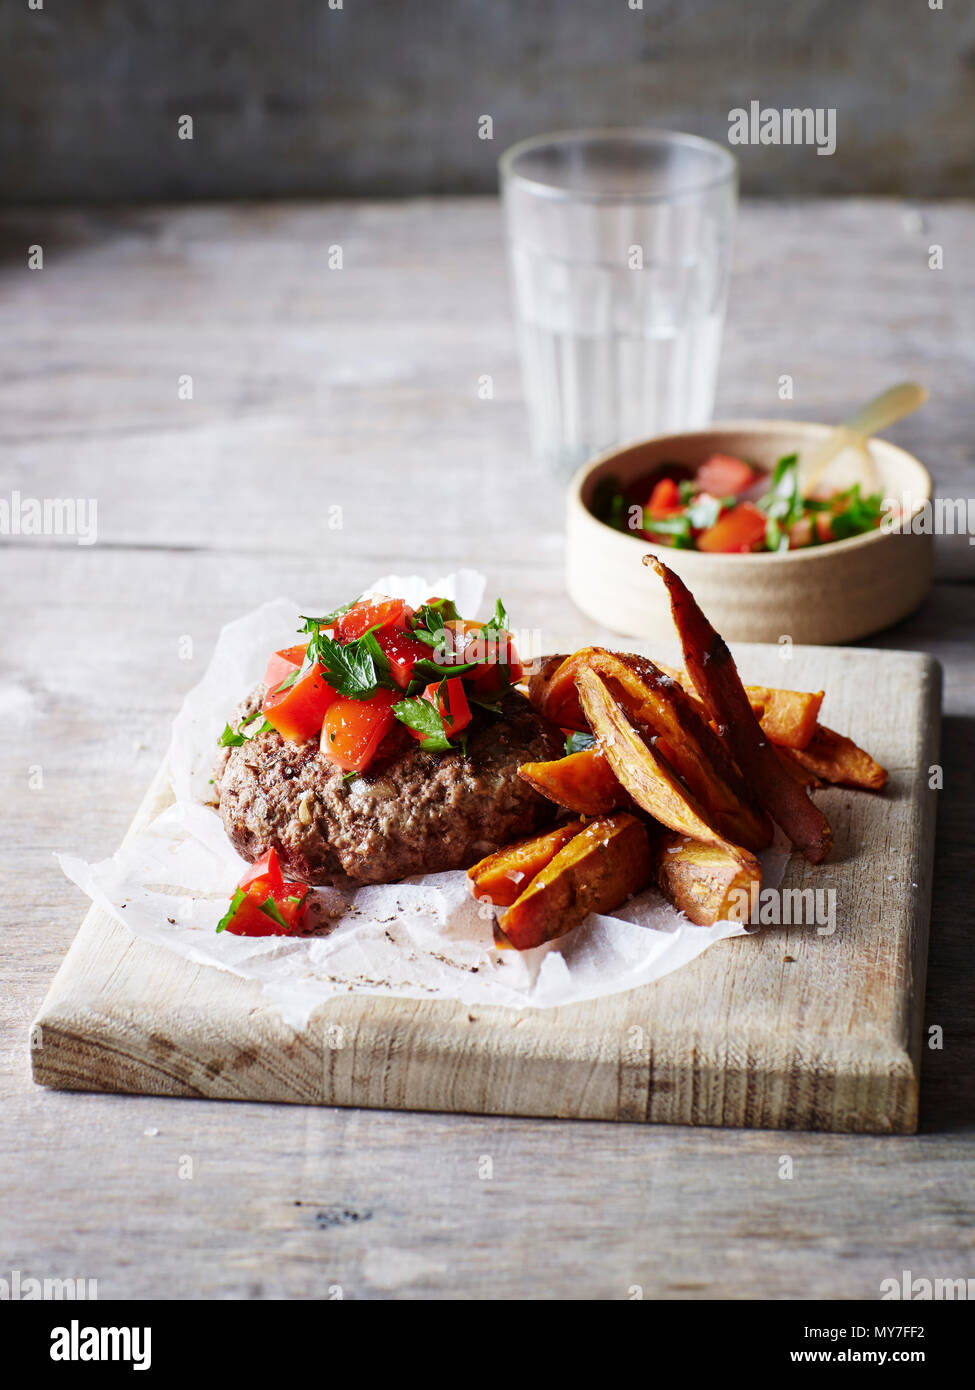 Still life of burger and chips on chopping board with salsa Stock Photo